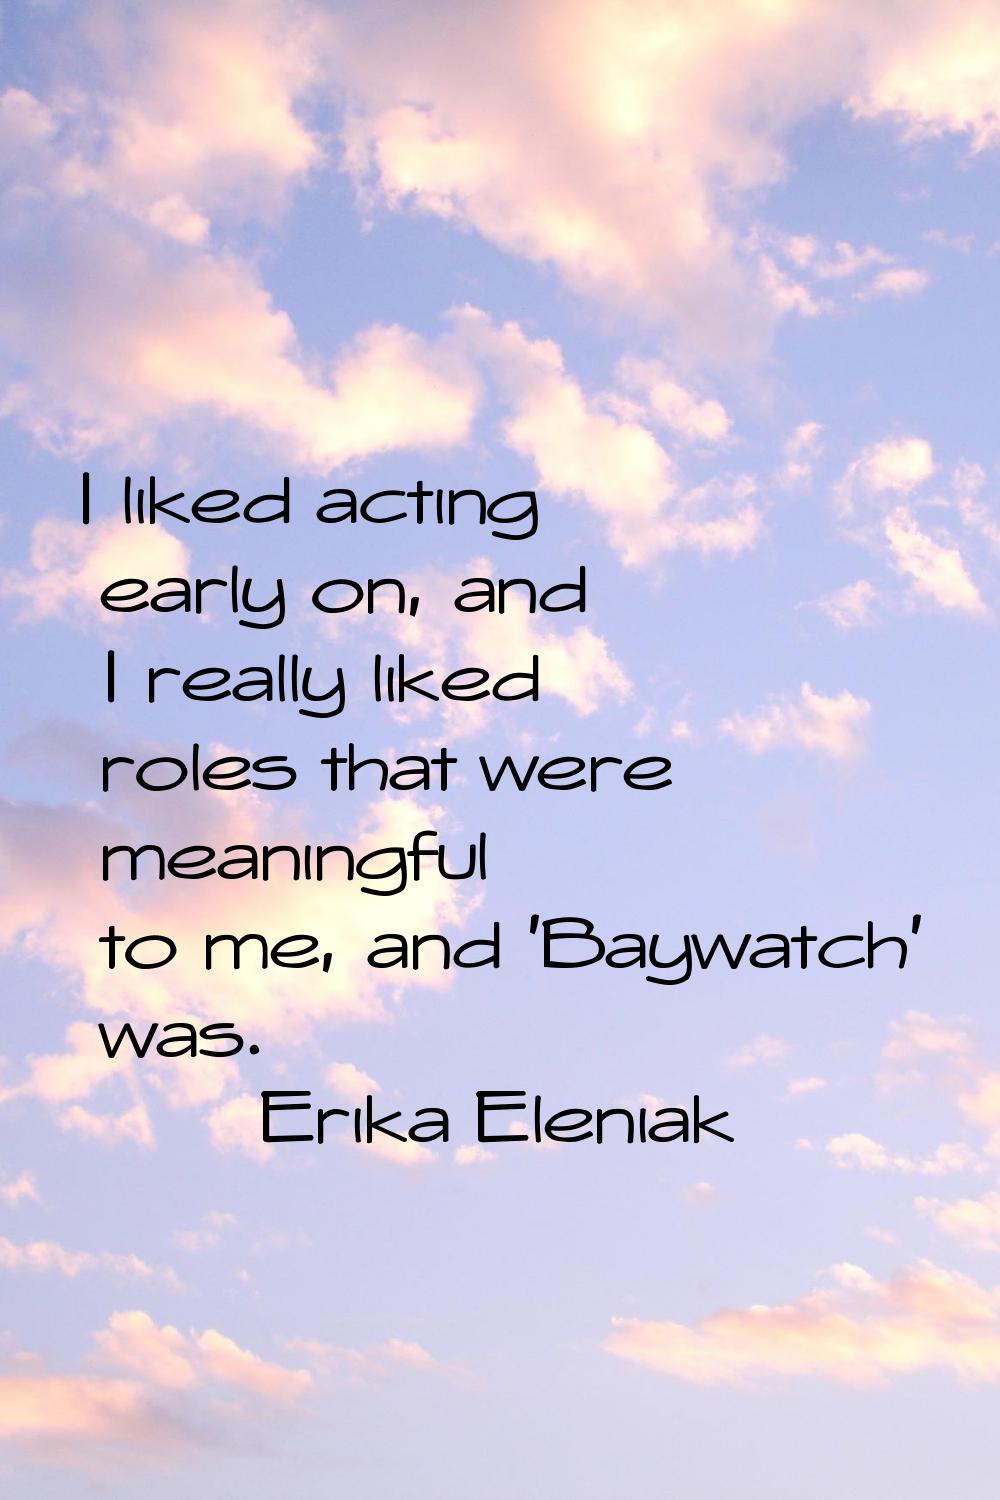 I liked acting early on, and I really liked roles that were meaningful to me, and 'Baywatch' was.